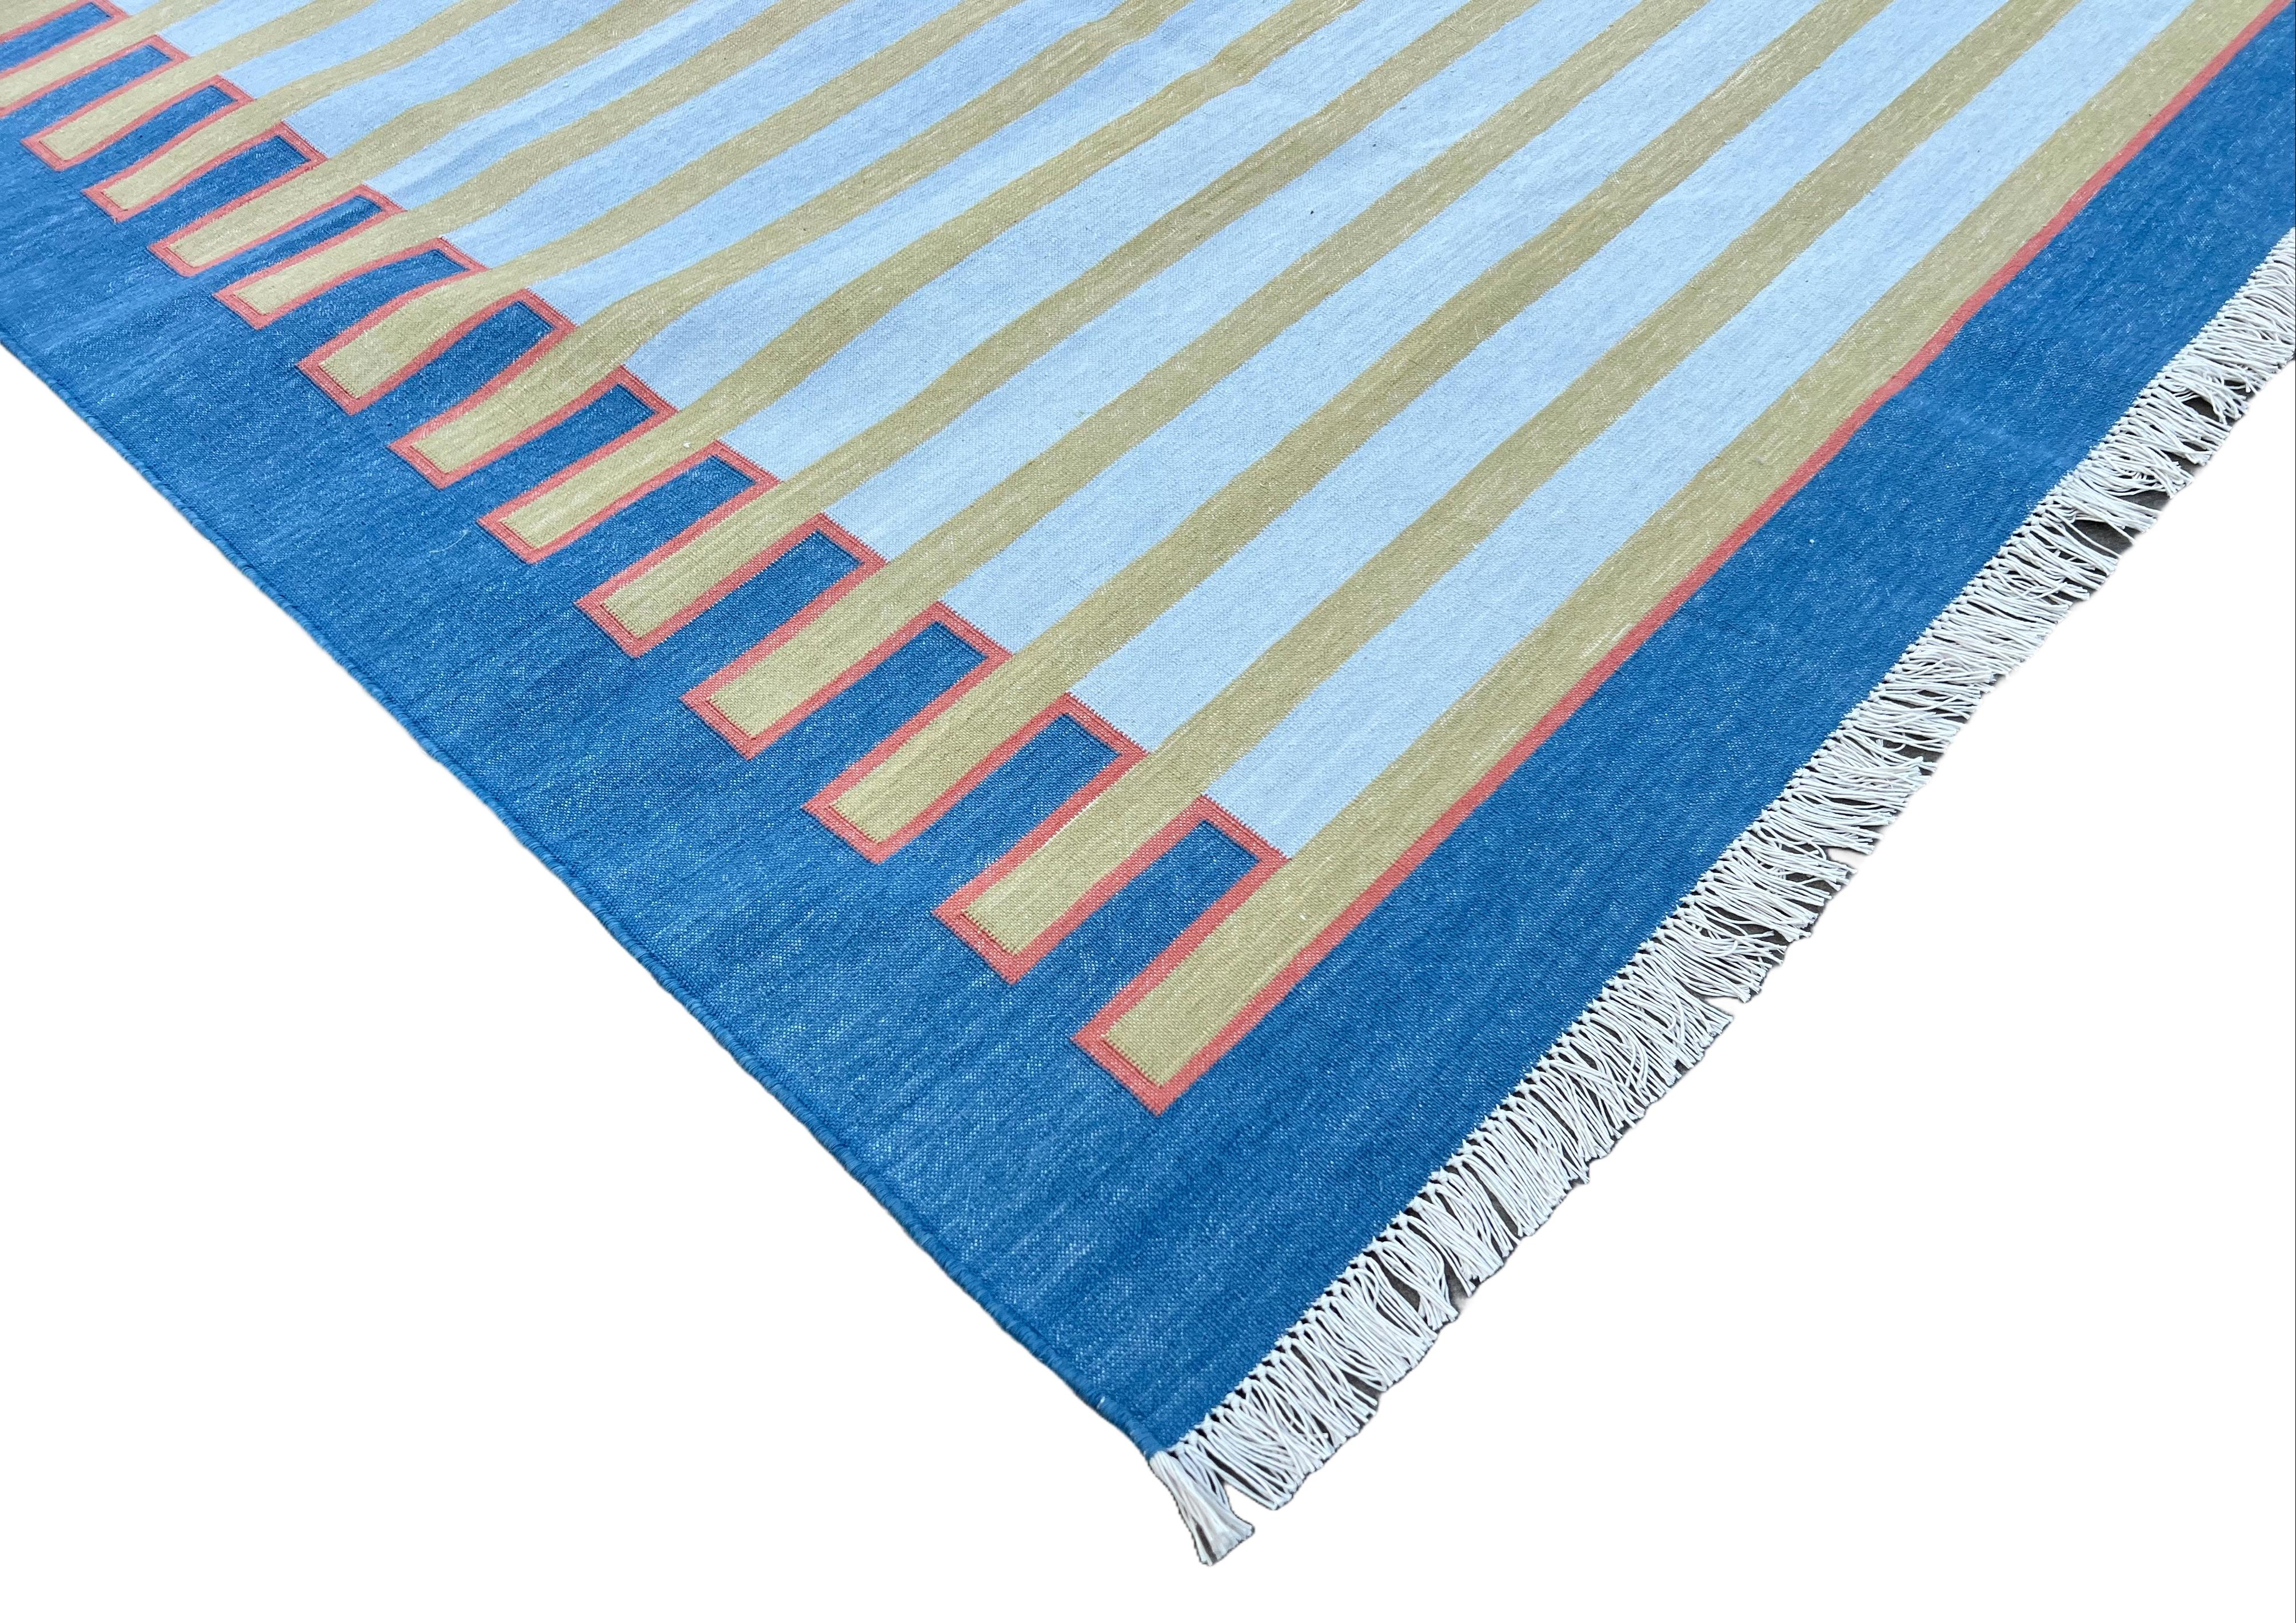 Hand-Woven Handmade Cotton Area Flat Weave Rug, 9x12 Blue And Green Zig Zag Striped Dhurrie For Sale